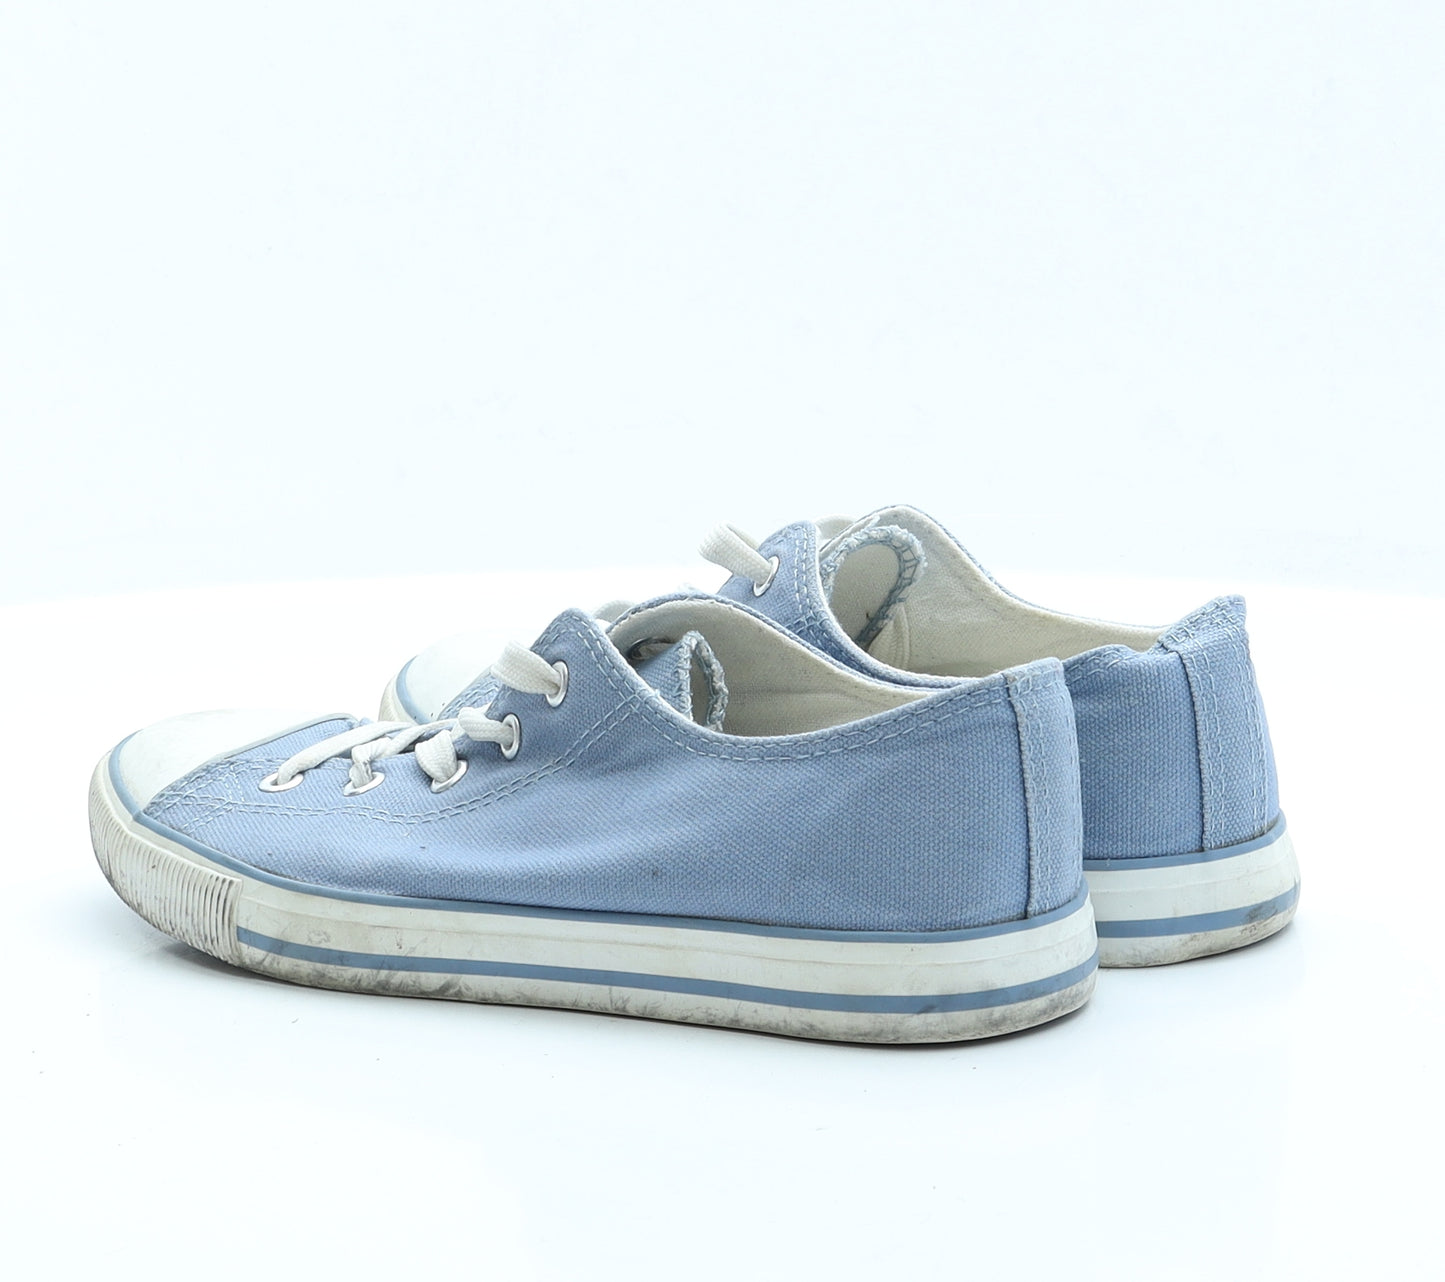 New Look Womens Blue  Fabric Trainer Casual UK 6 39